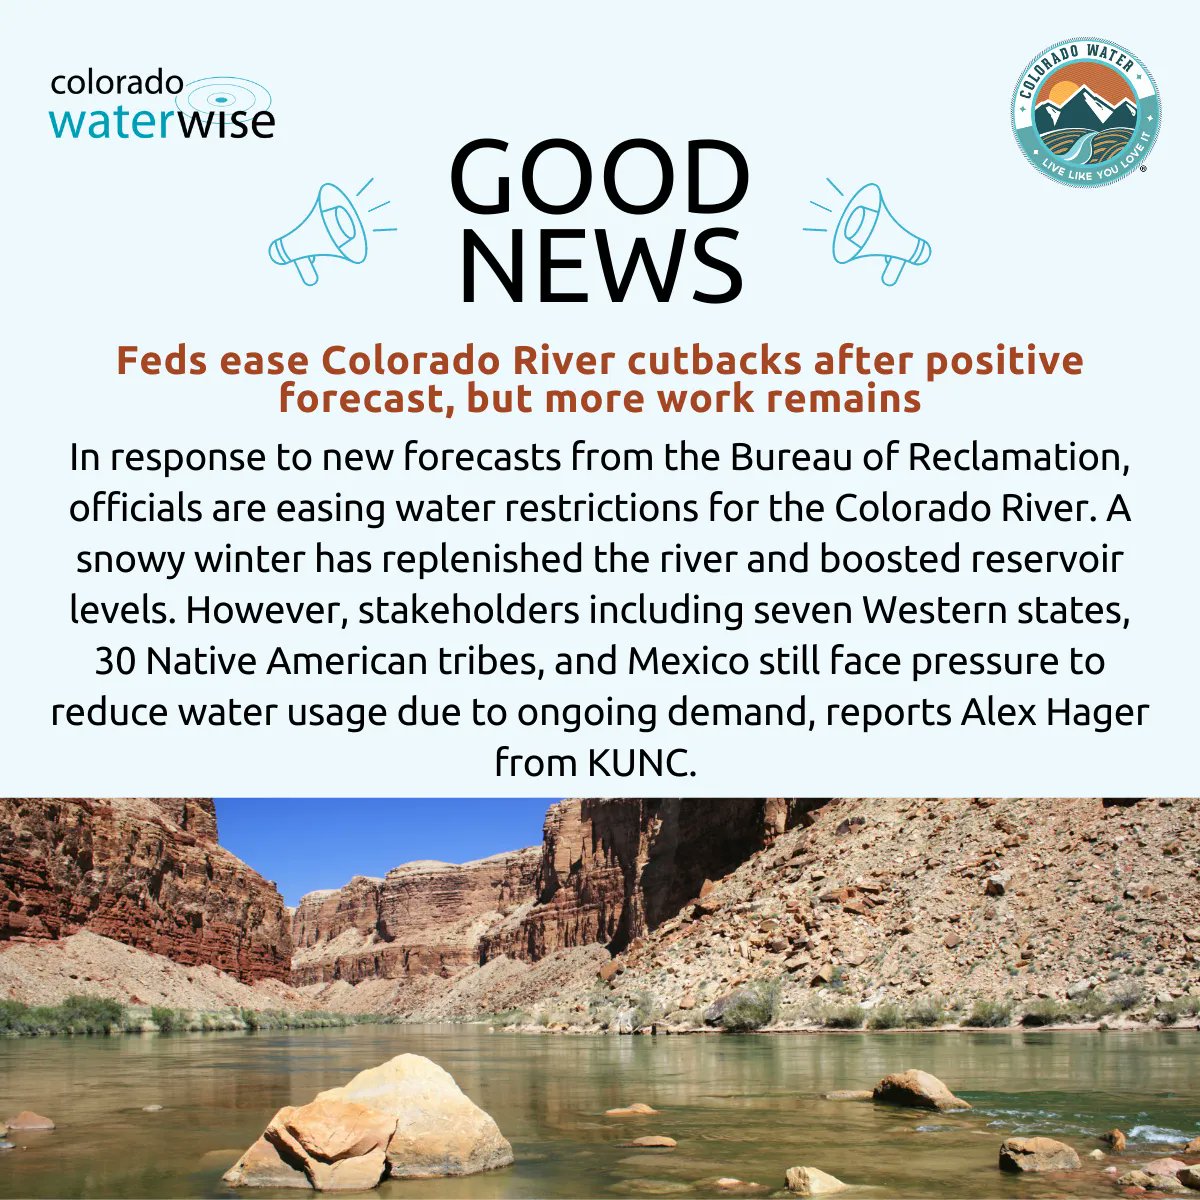 Good news! Read the full article here: buff.ly/47qwQku 

#ColoradoWater #COWater #CWW #ColoradoWaterWise #LLYLI #LiveLikeYouLoveIt #water #goodnews #waternews